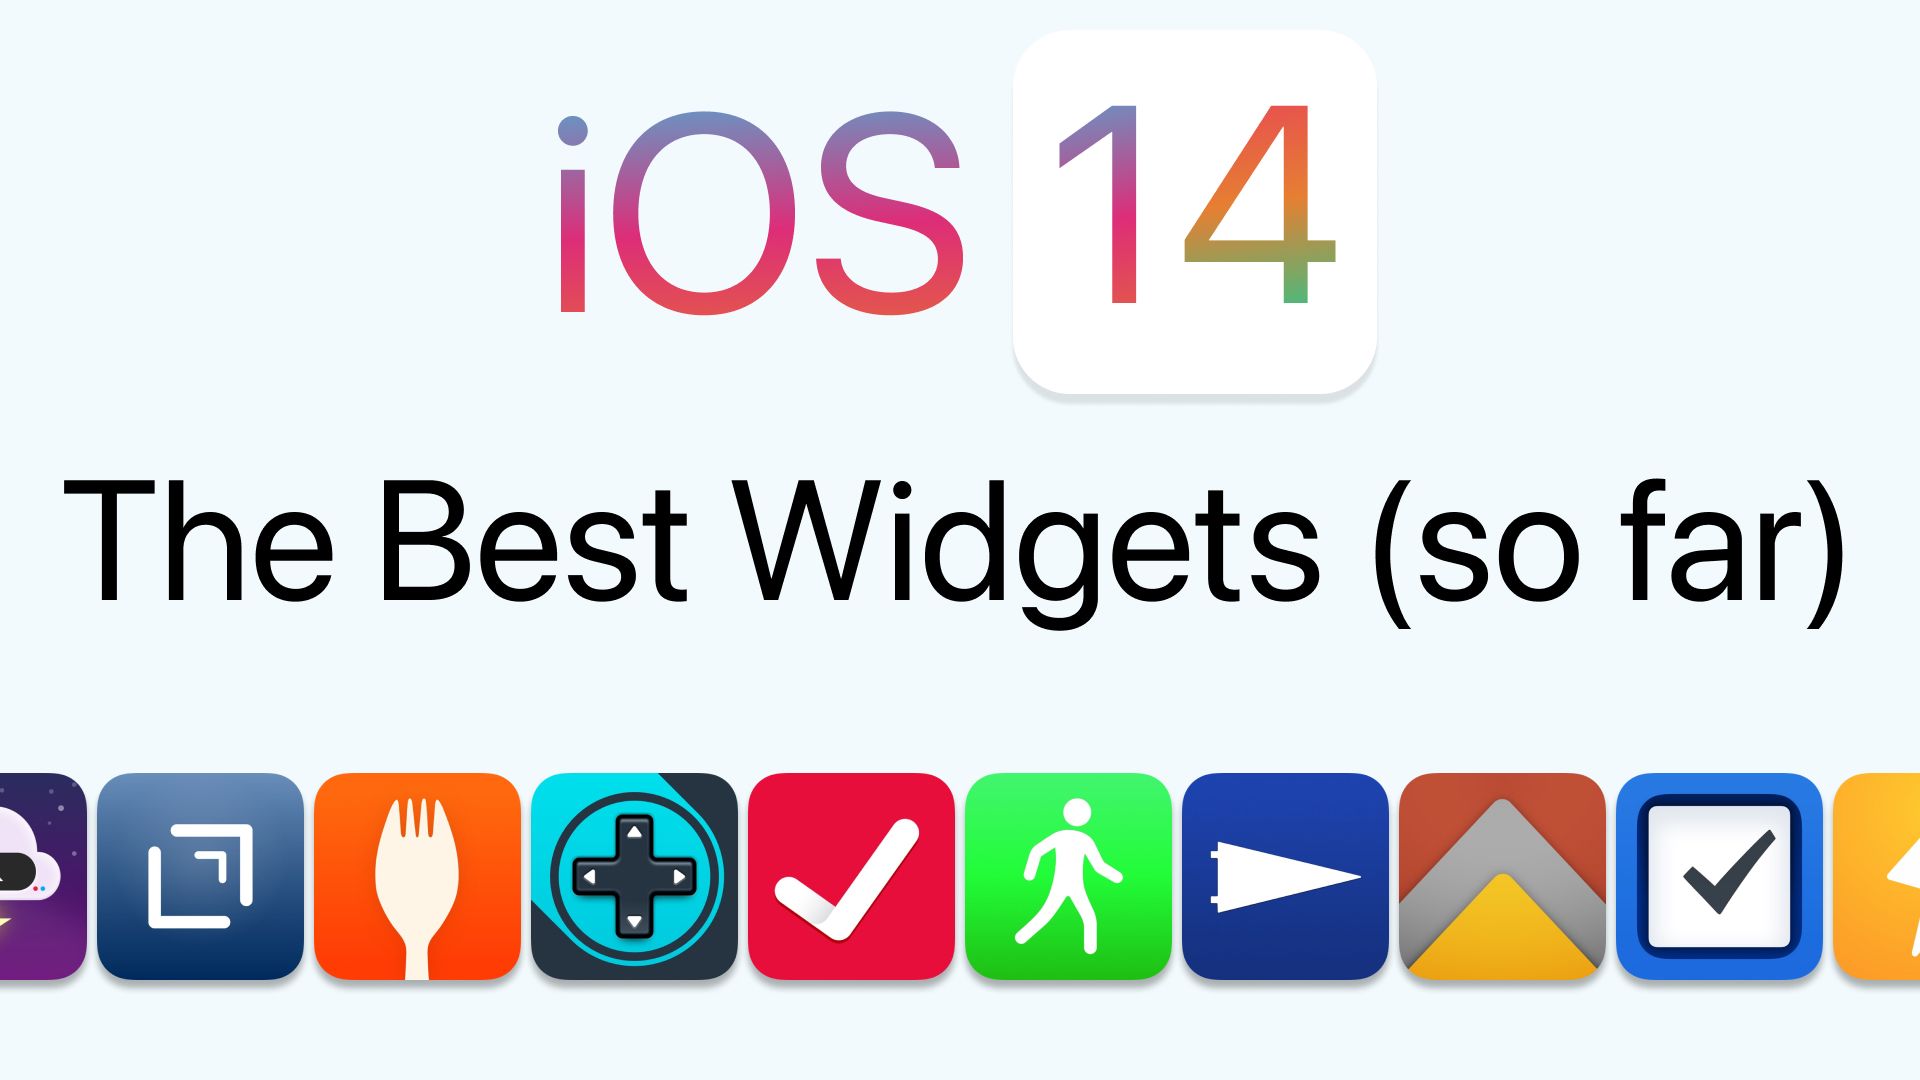 10 of the Best Widgets I've Found in iOS 14 (so far)